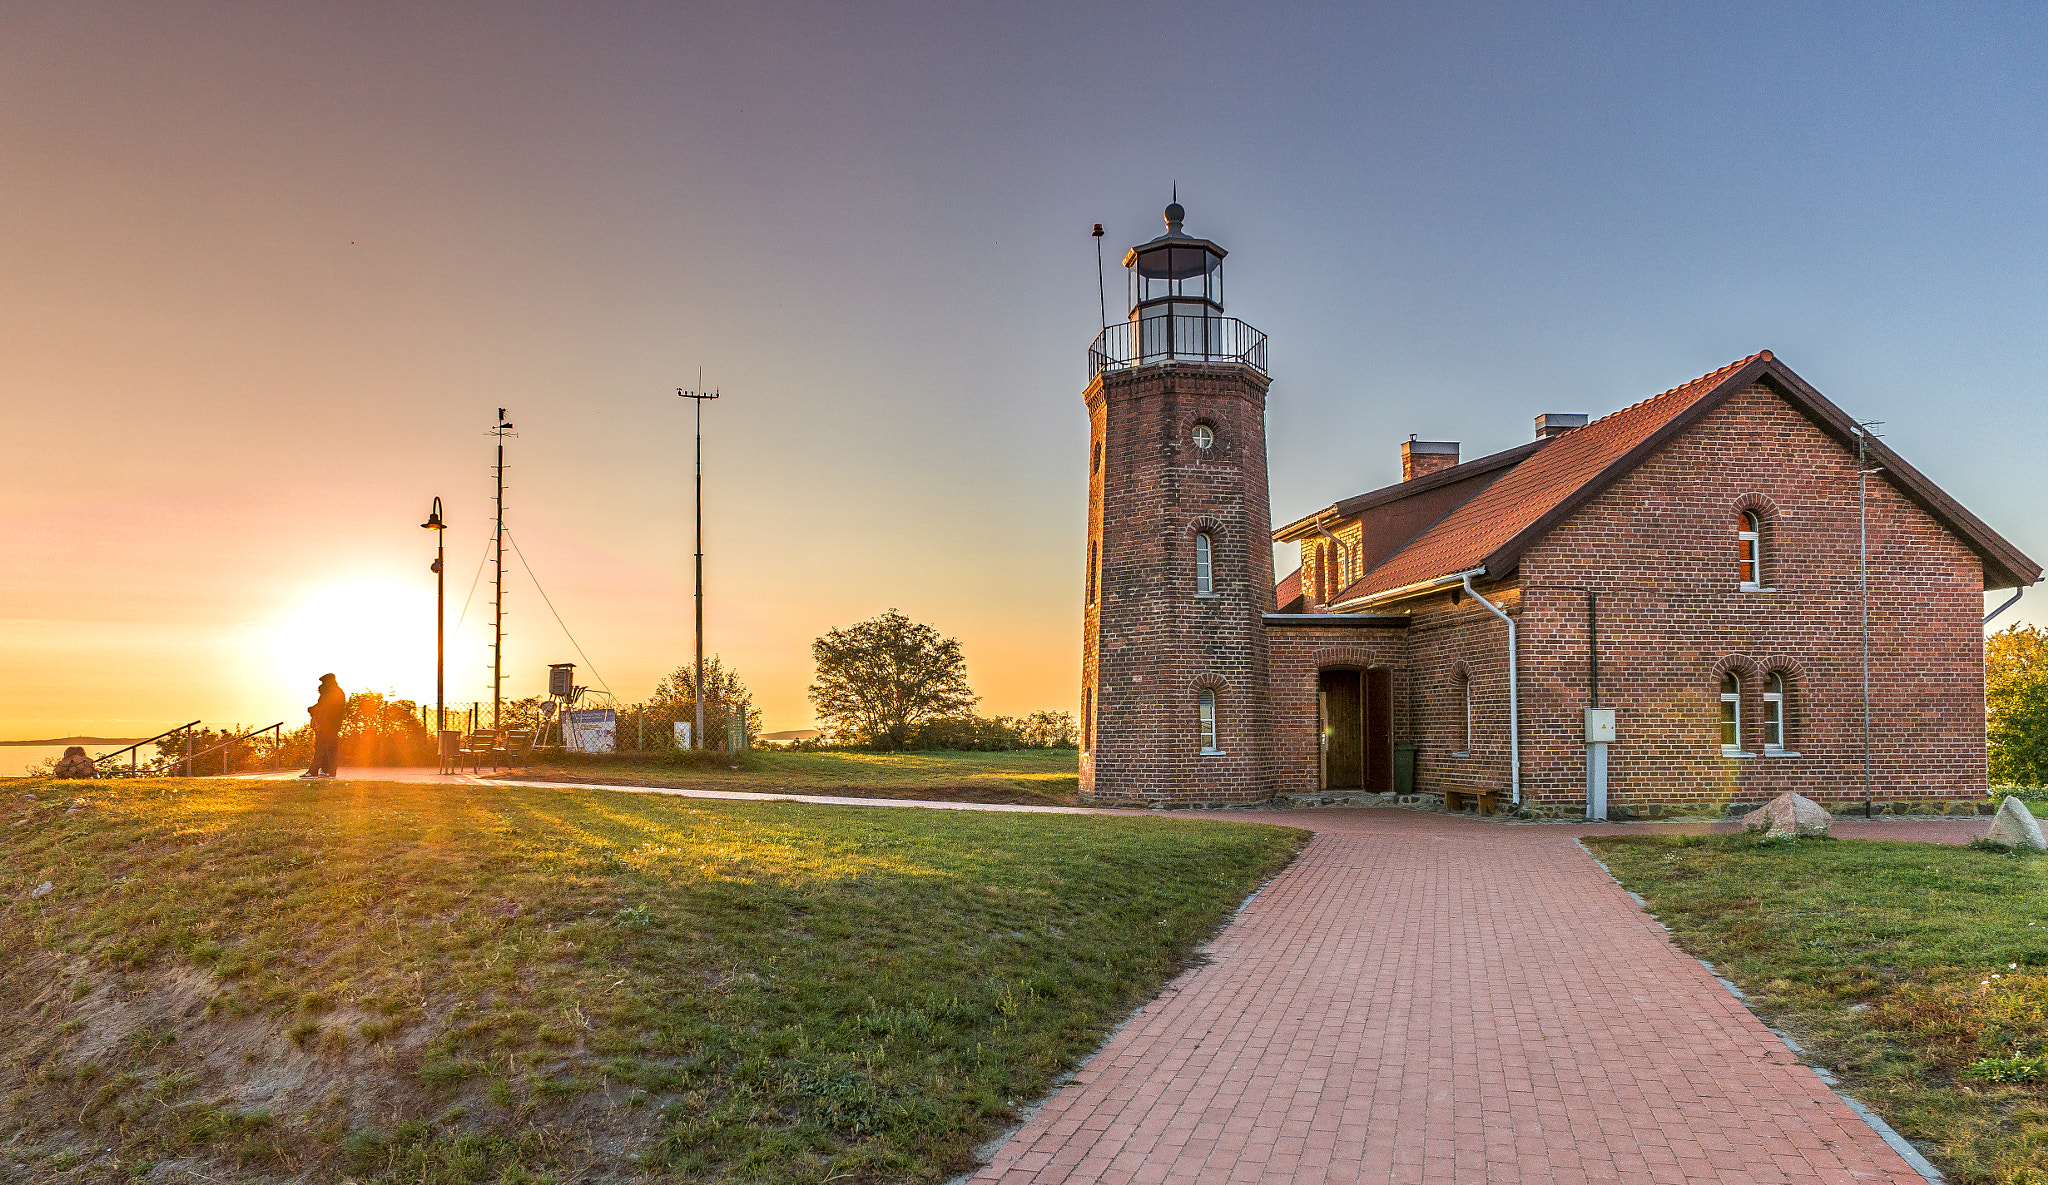 Sony a6300 + ZEISS Touit 12mm F2.8 sample photo. Ventės ragas lighthouse photography